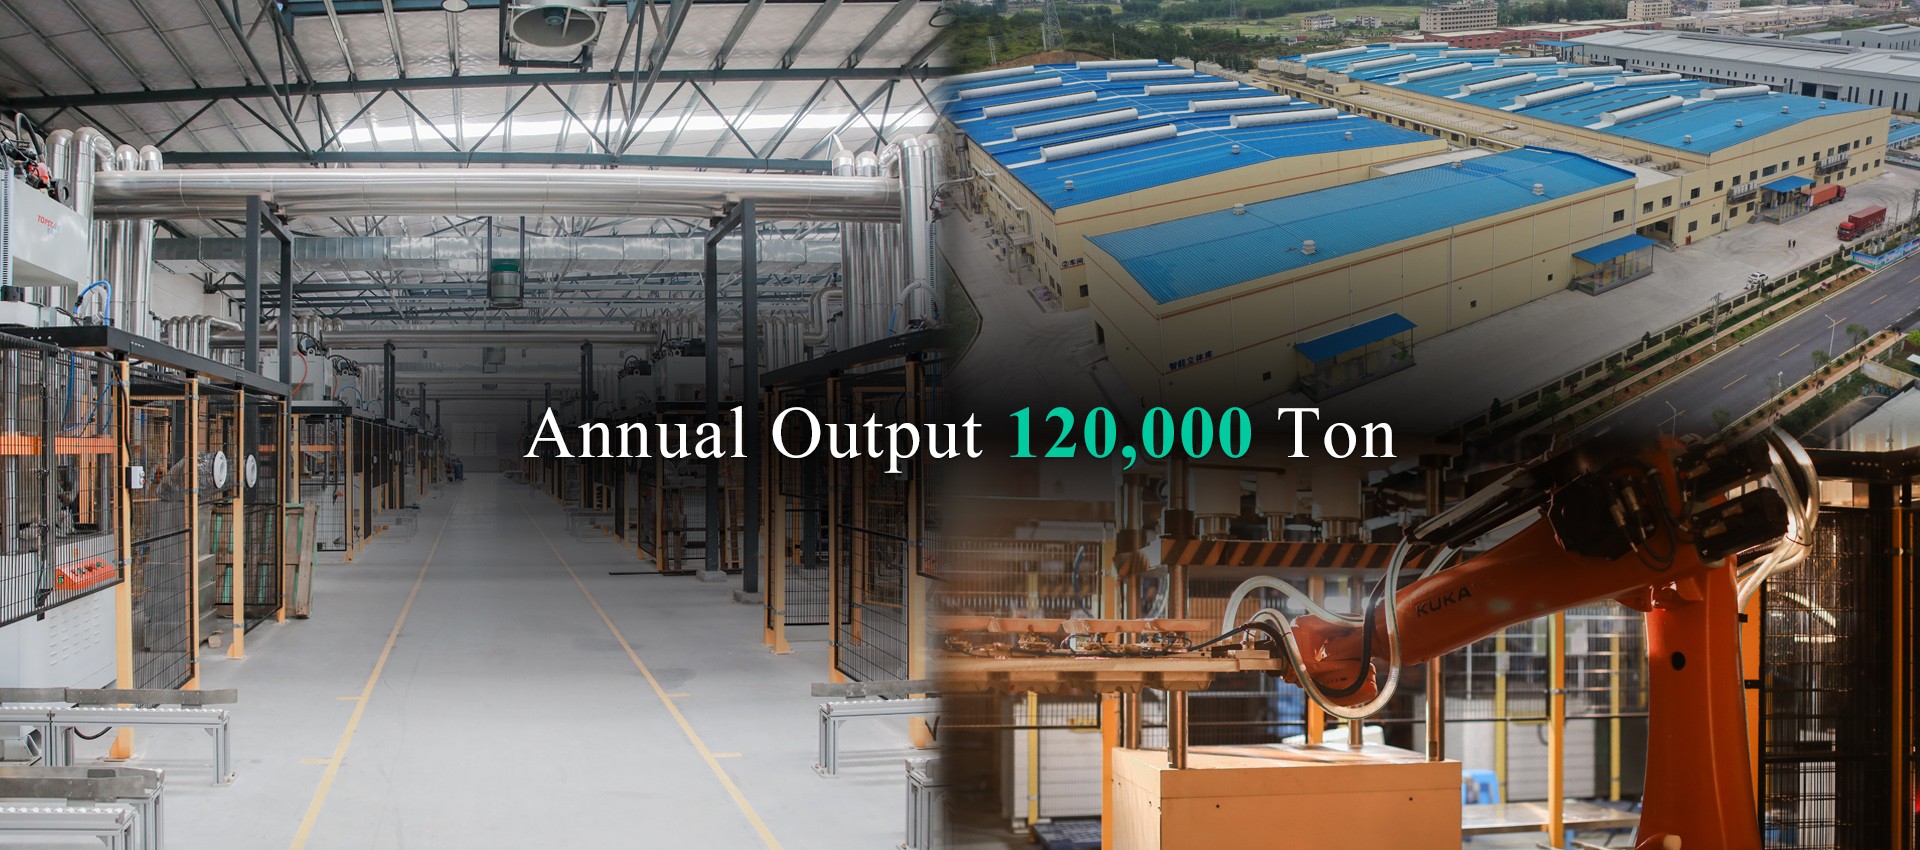 luahou Pack's annual output is 120,000 ton